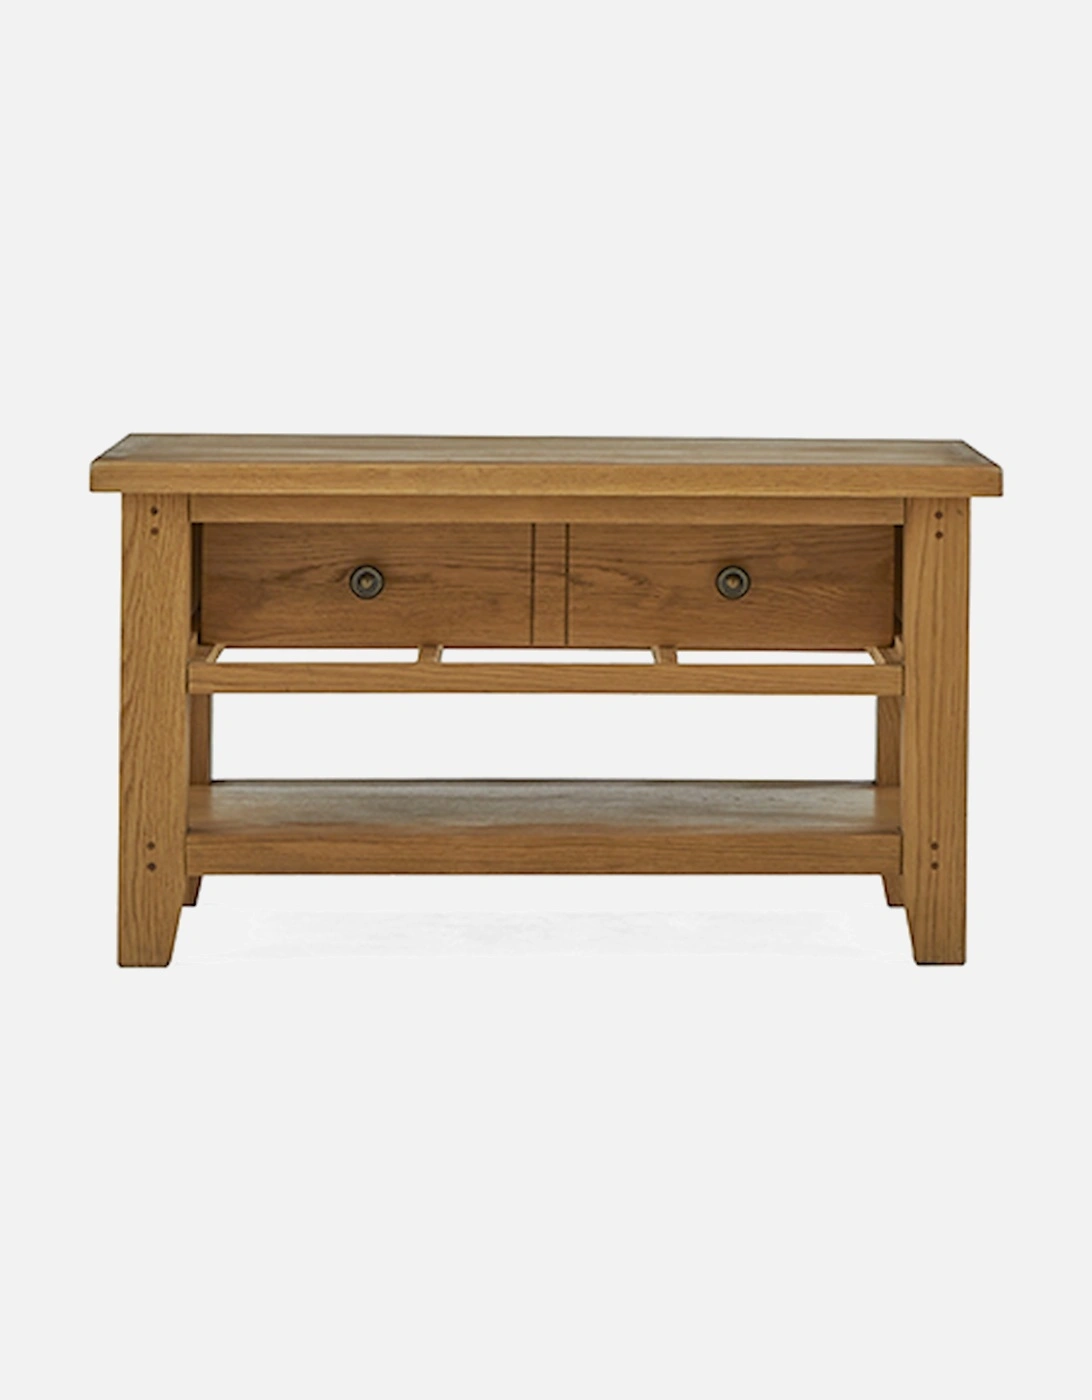 Burford Small Coffee Table With Drawers